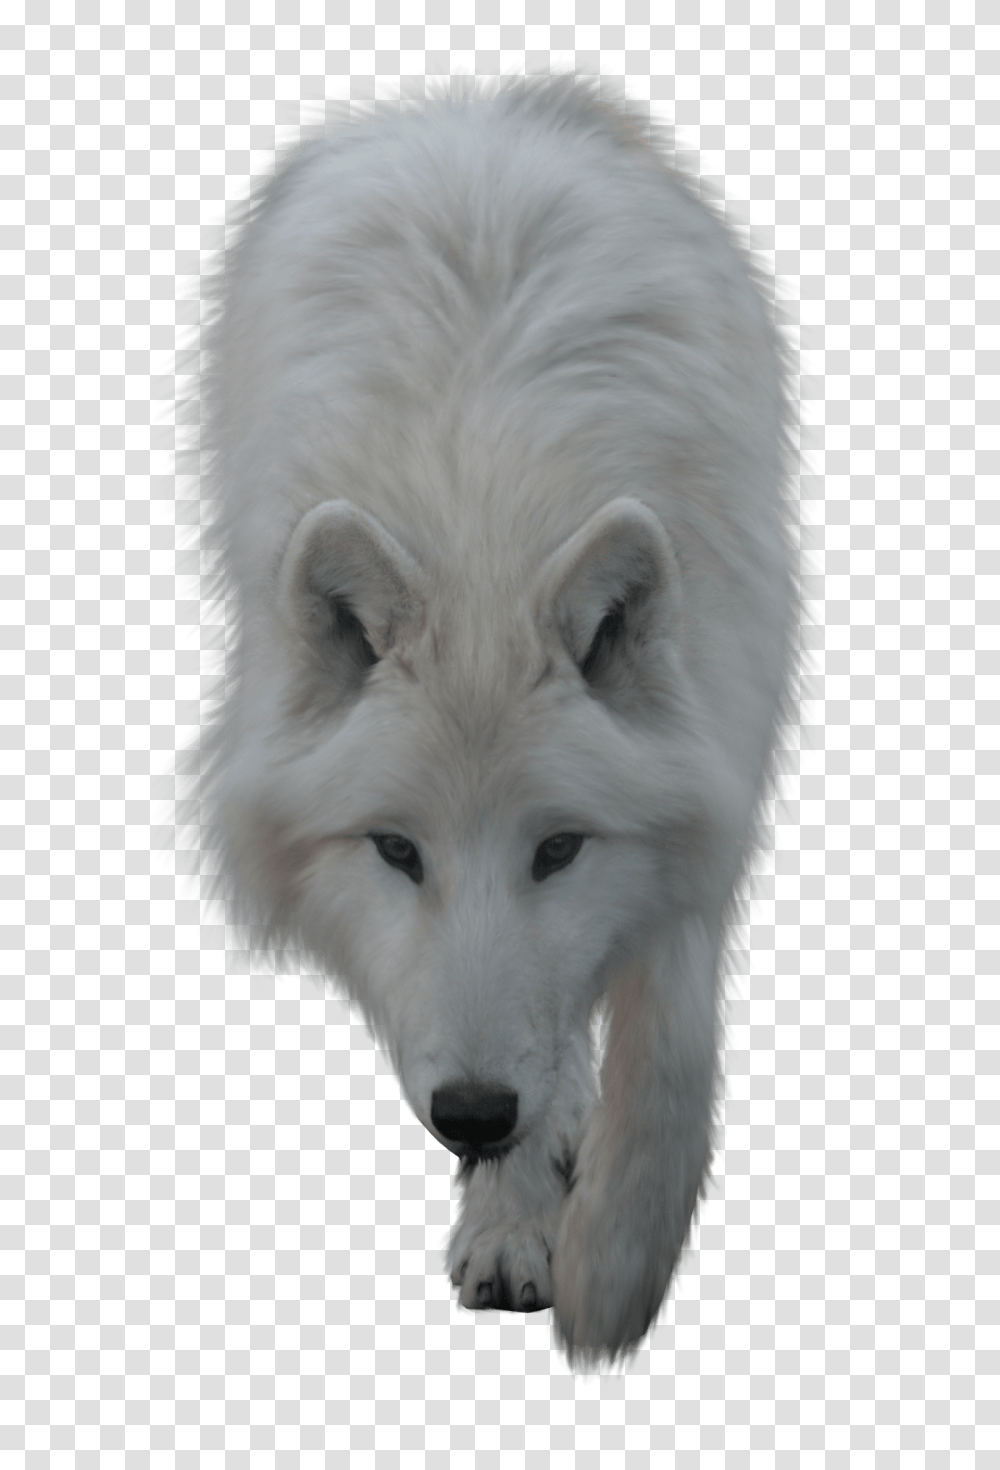 Download Hd Animals Wolves Wolf White Wolf Background, Dog, Pet, Canine, Mammal Transparent Png